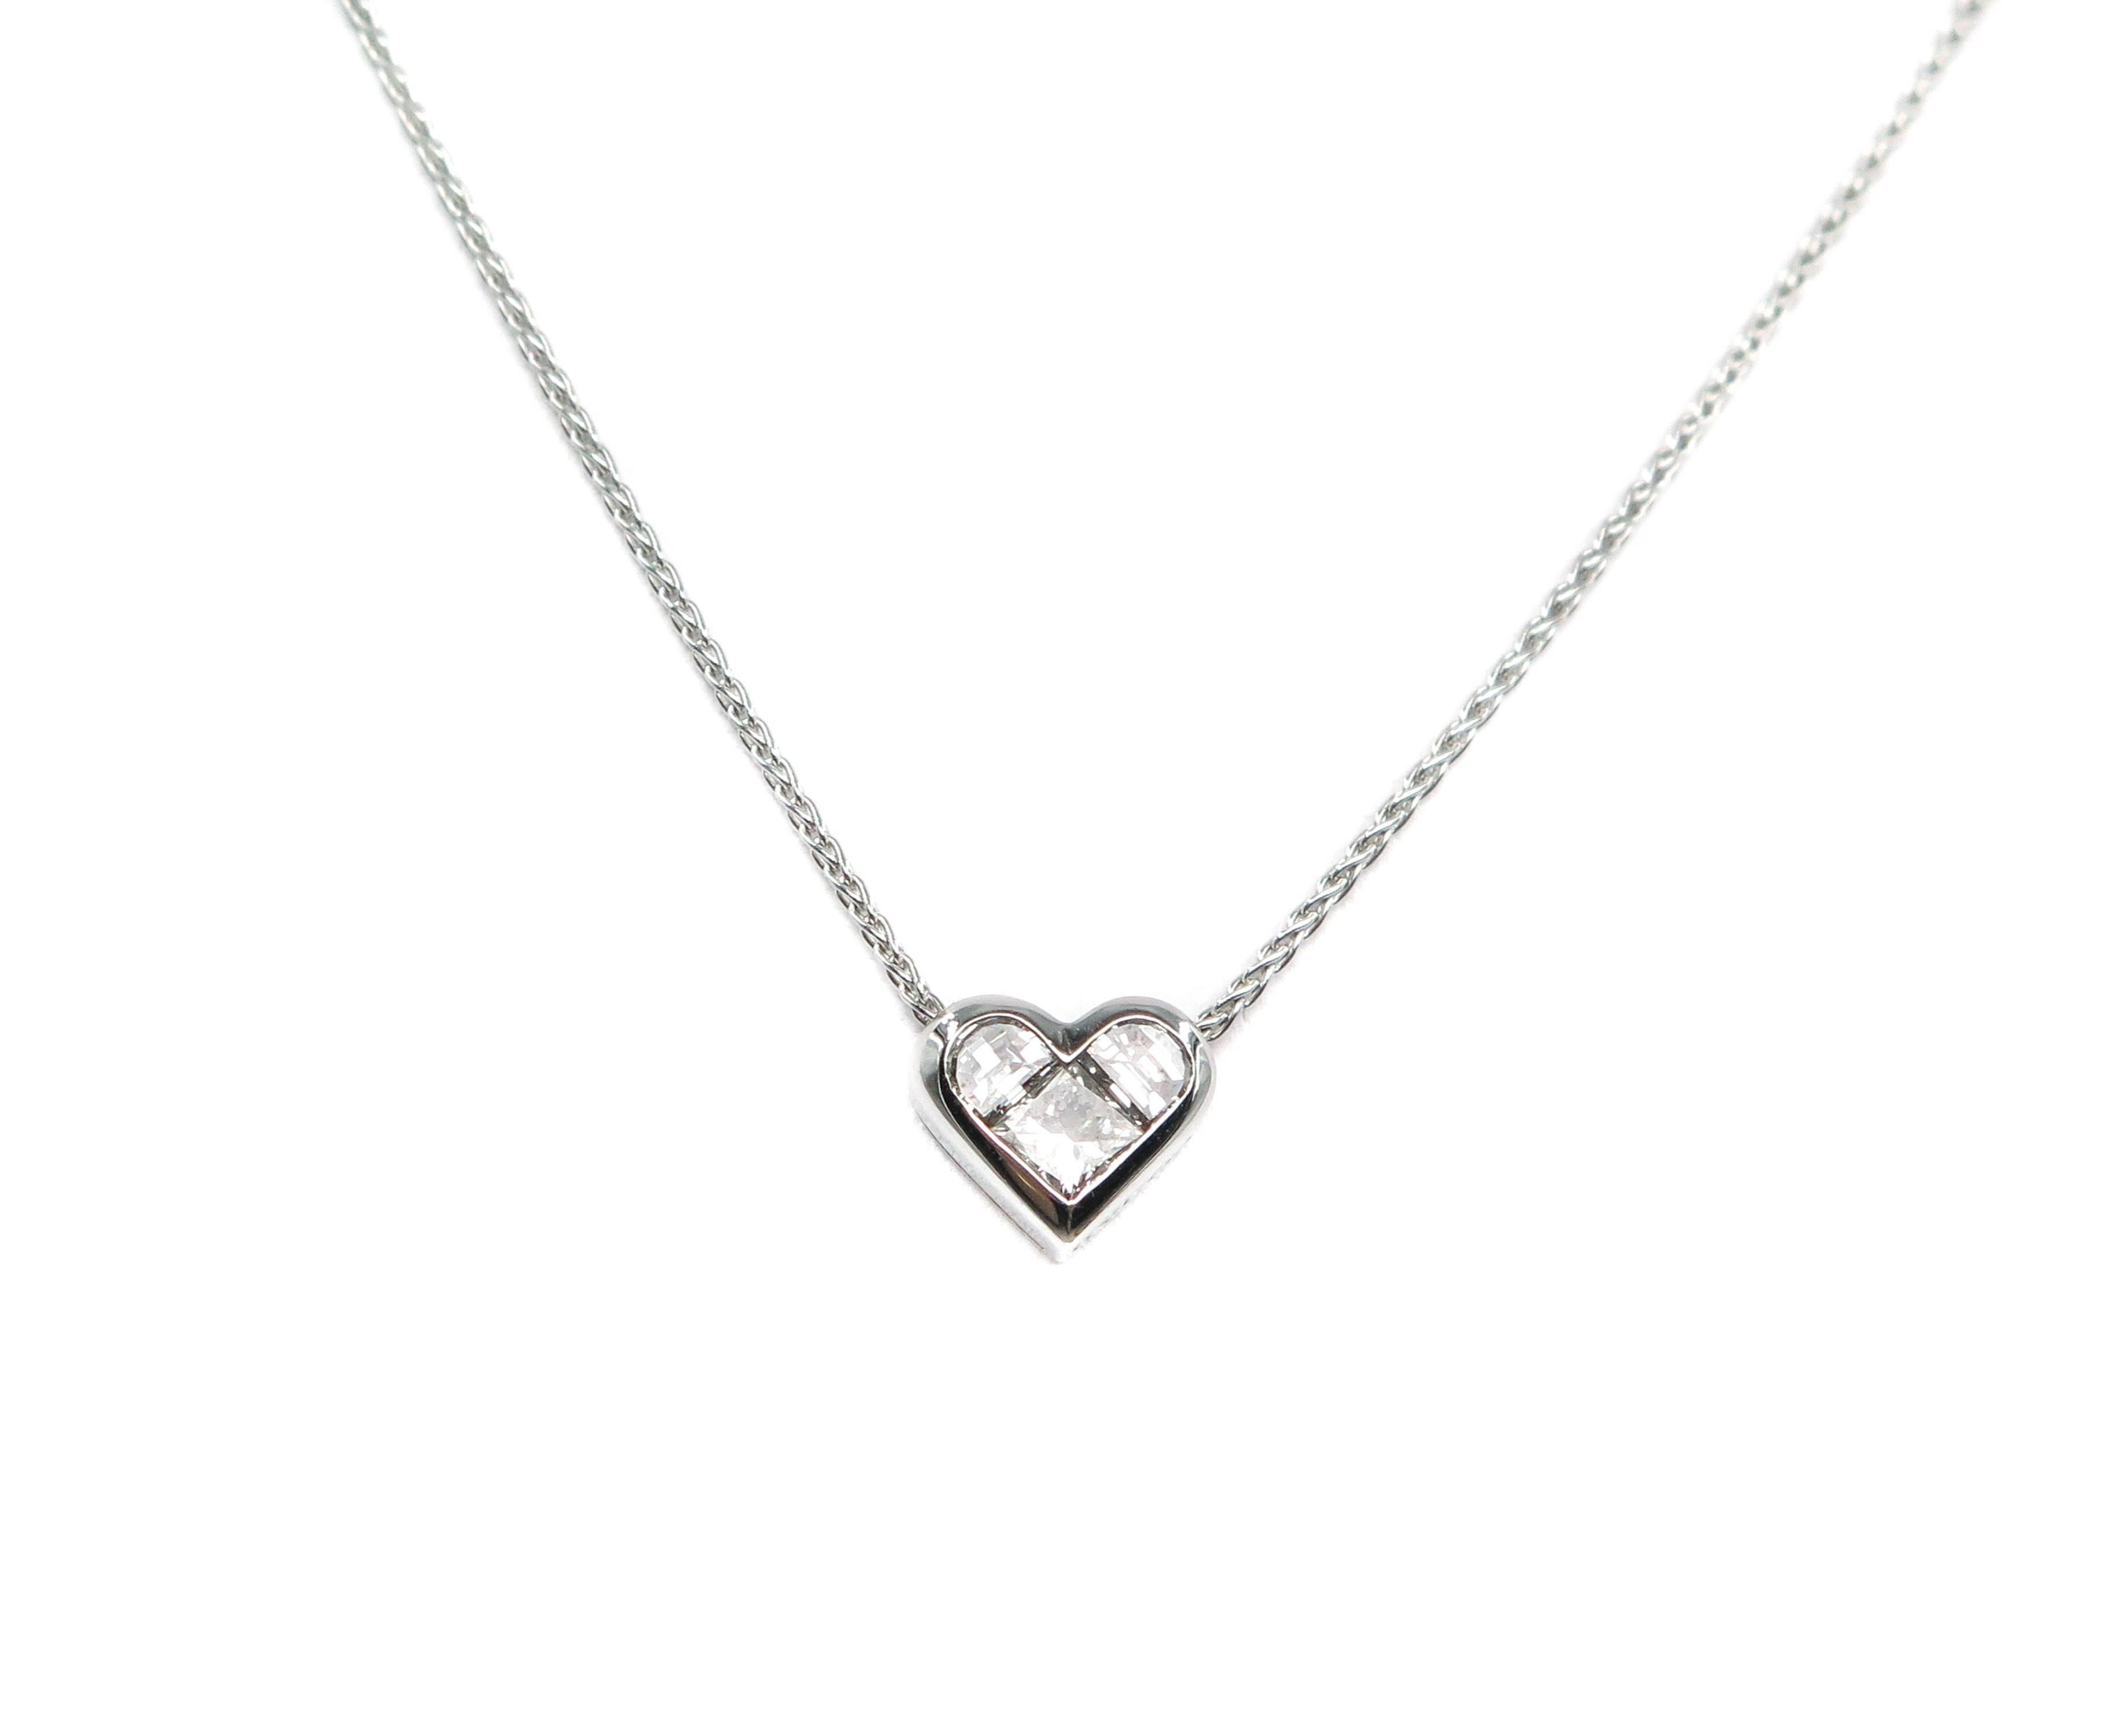 Inspired by shapes... blending diamonds... this Bvlgari pendant makes a statement with an easy to wear for every occasion from the most informal to the most special.
Handcrafted in Italy in 18k white gold and suspended by a 16 inch wheat chain, this